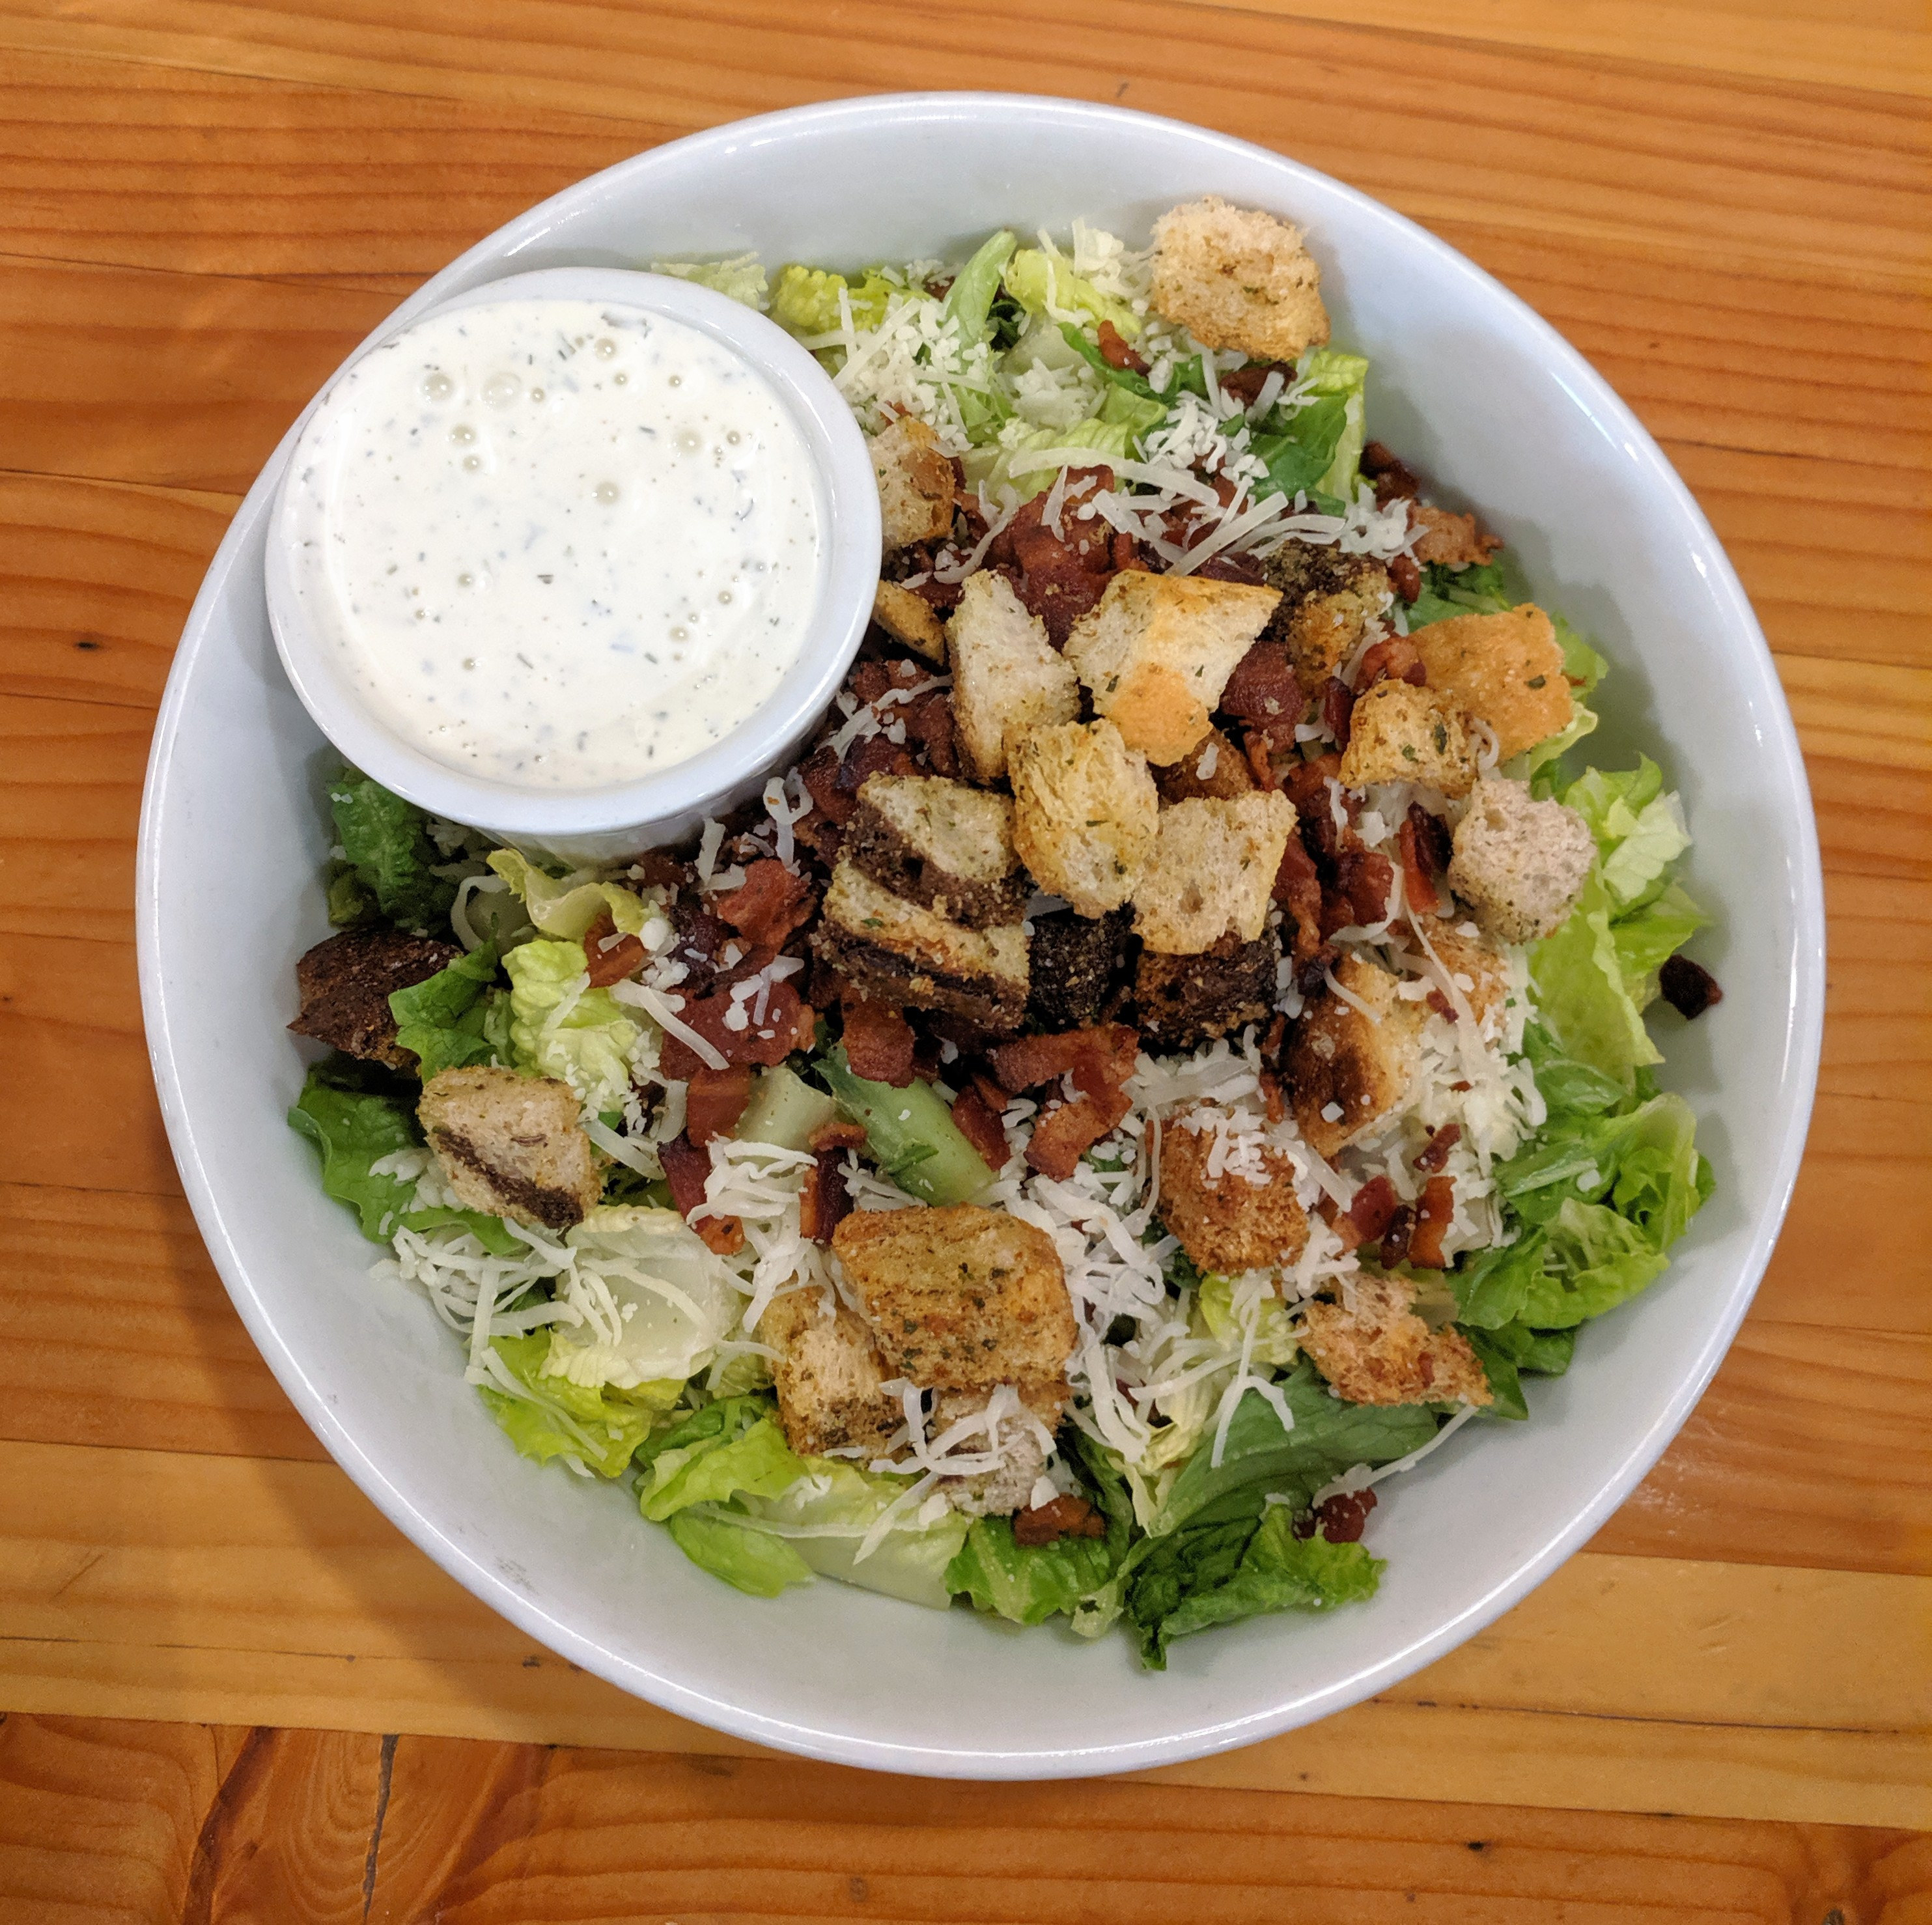 A salad with Ranch dressing.